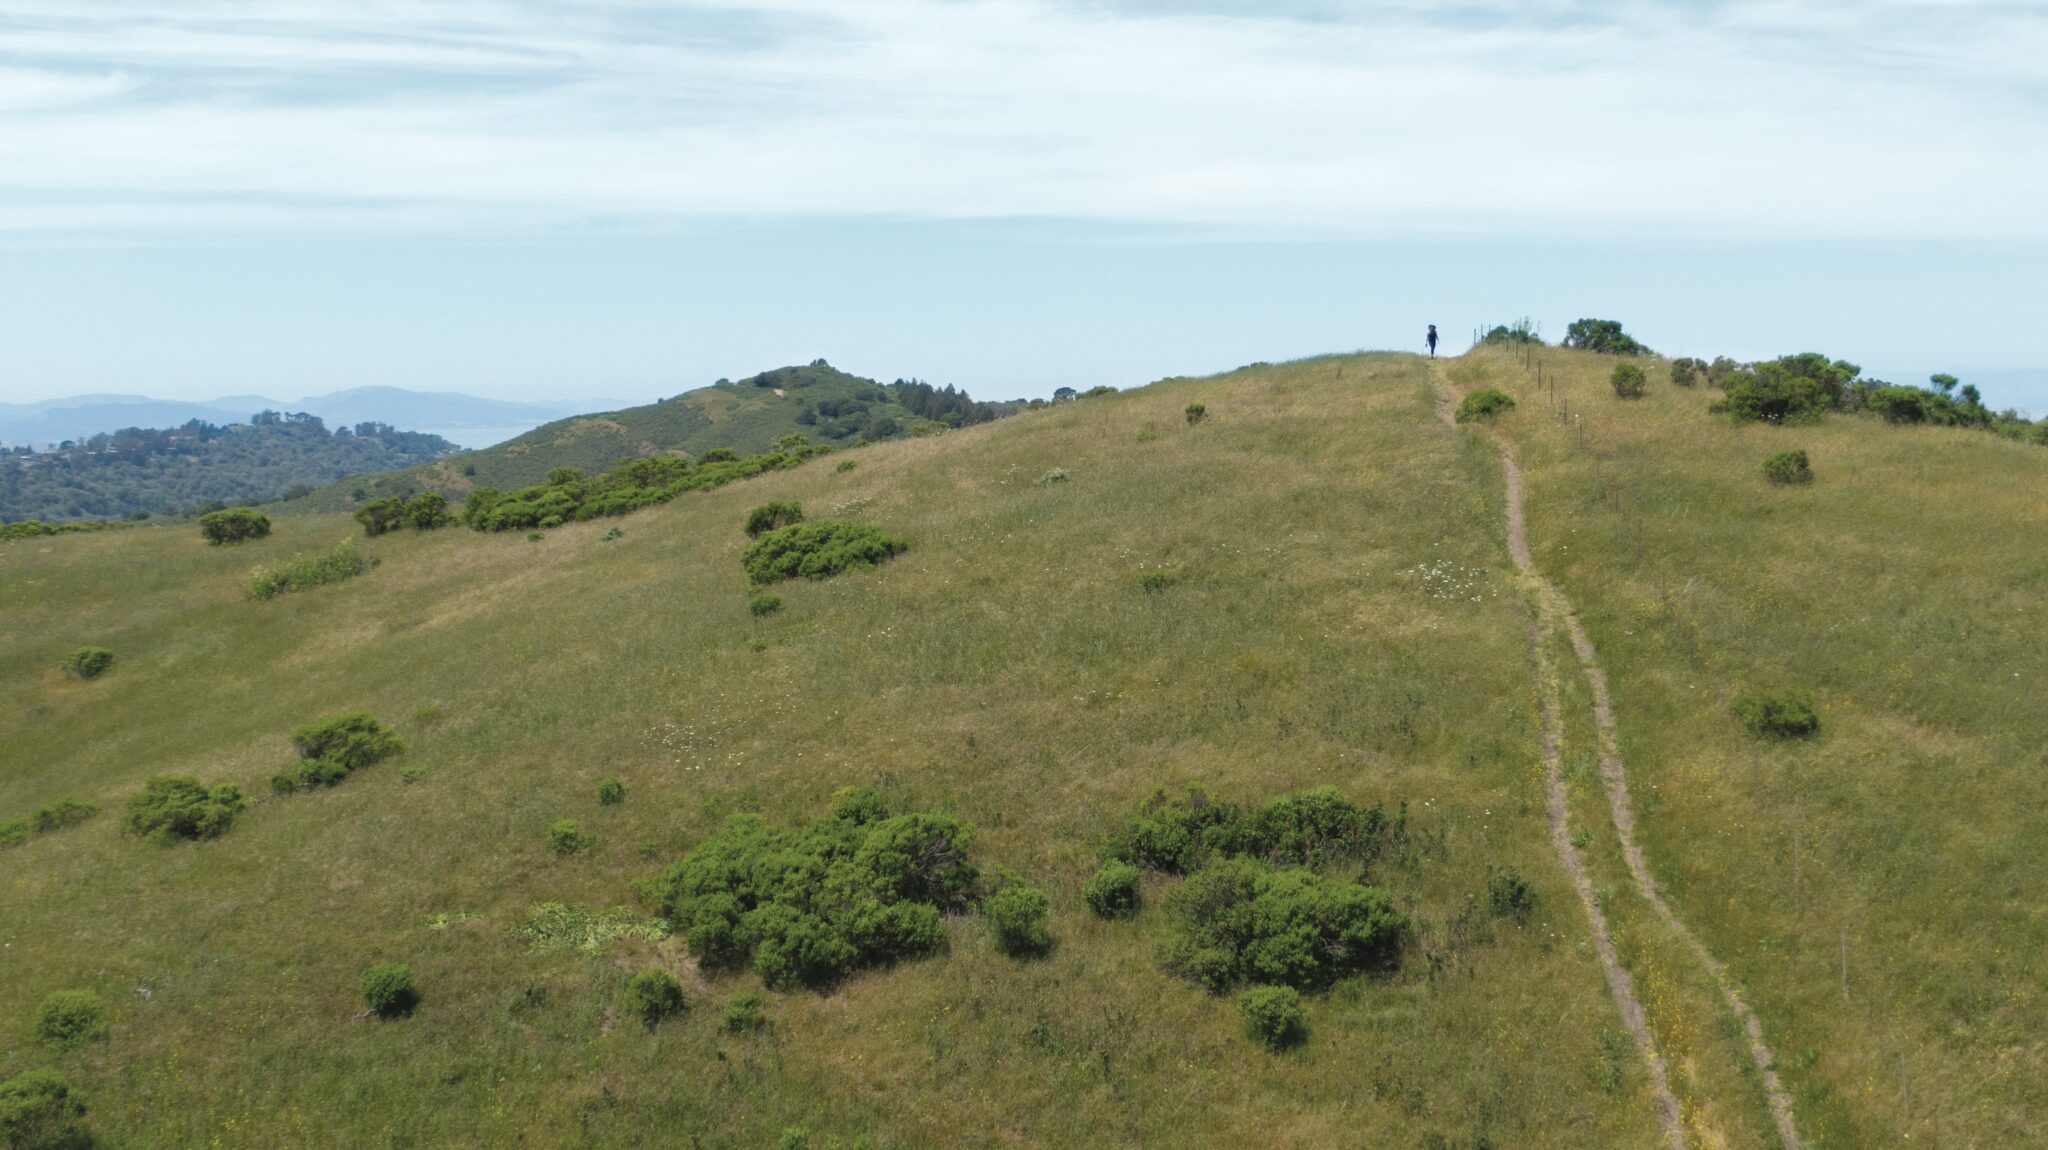 A hiking path goes up a hill